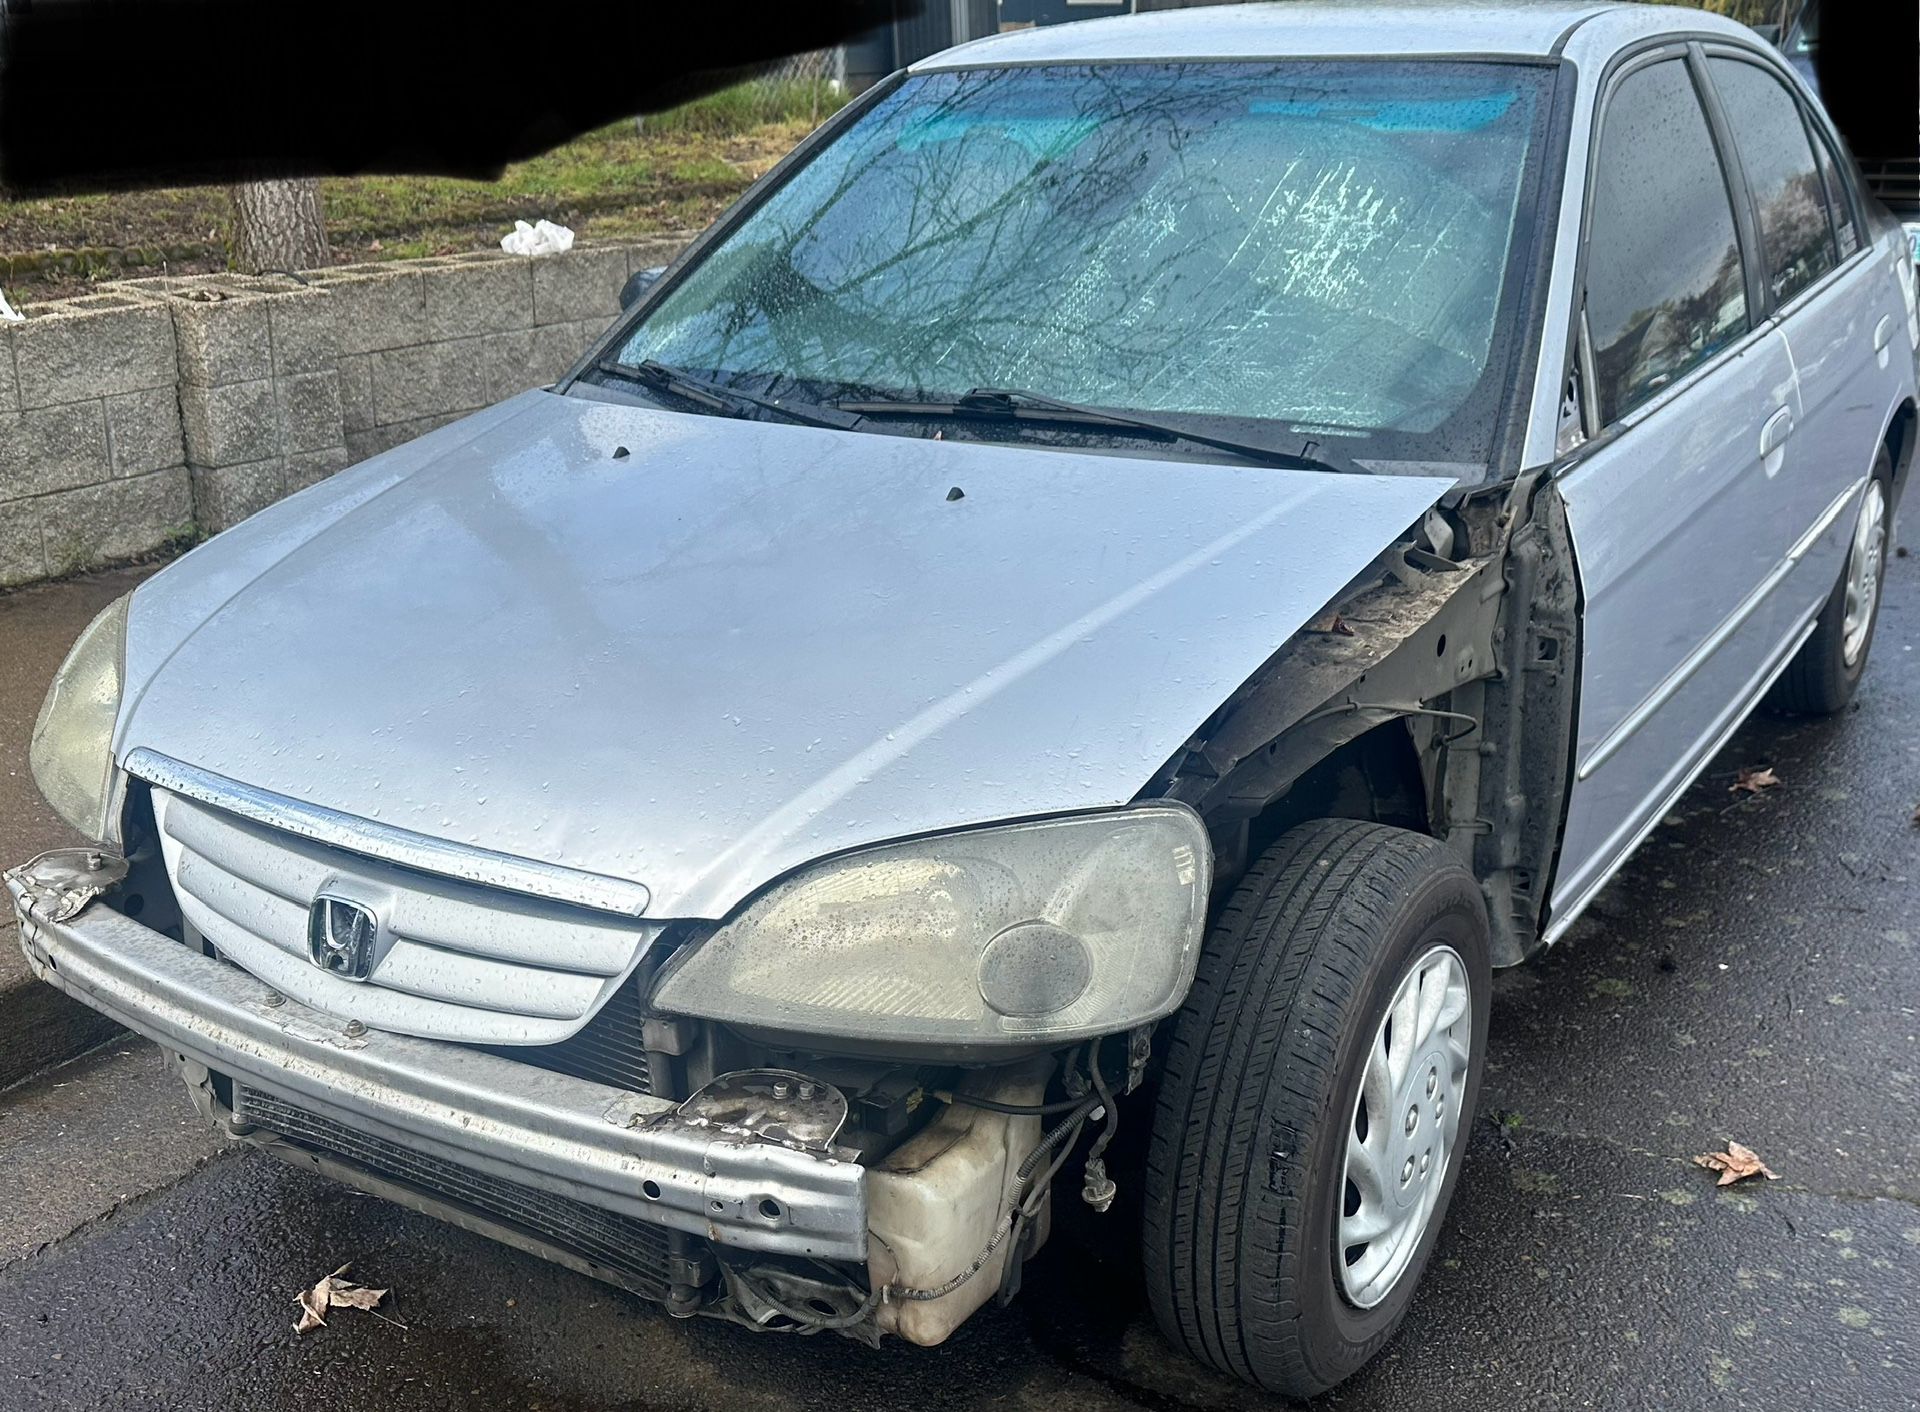 2002 Honda Civic (EVERYTHING MUST GO) “Parts Or Whole Car”